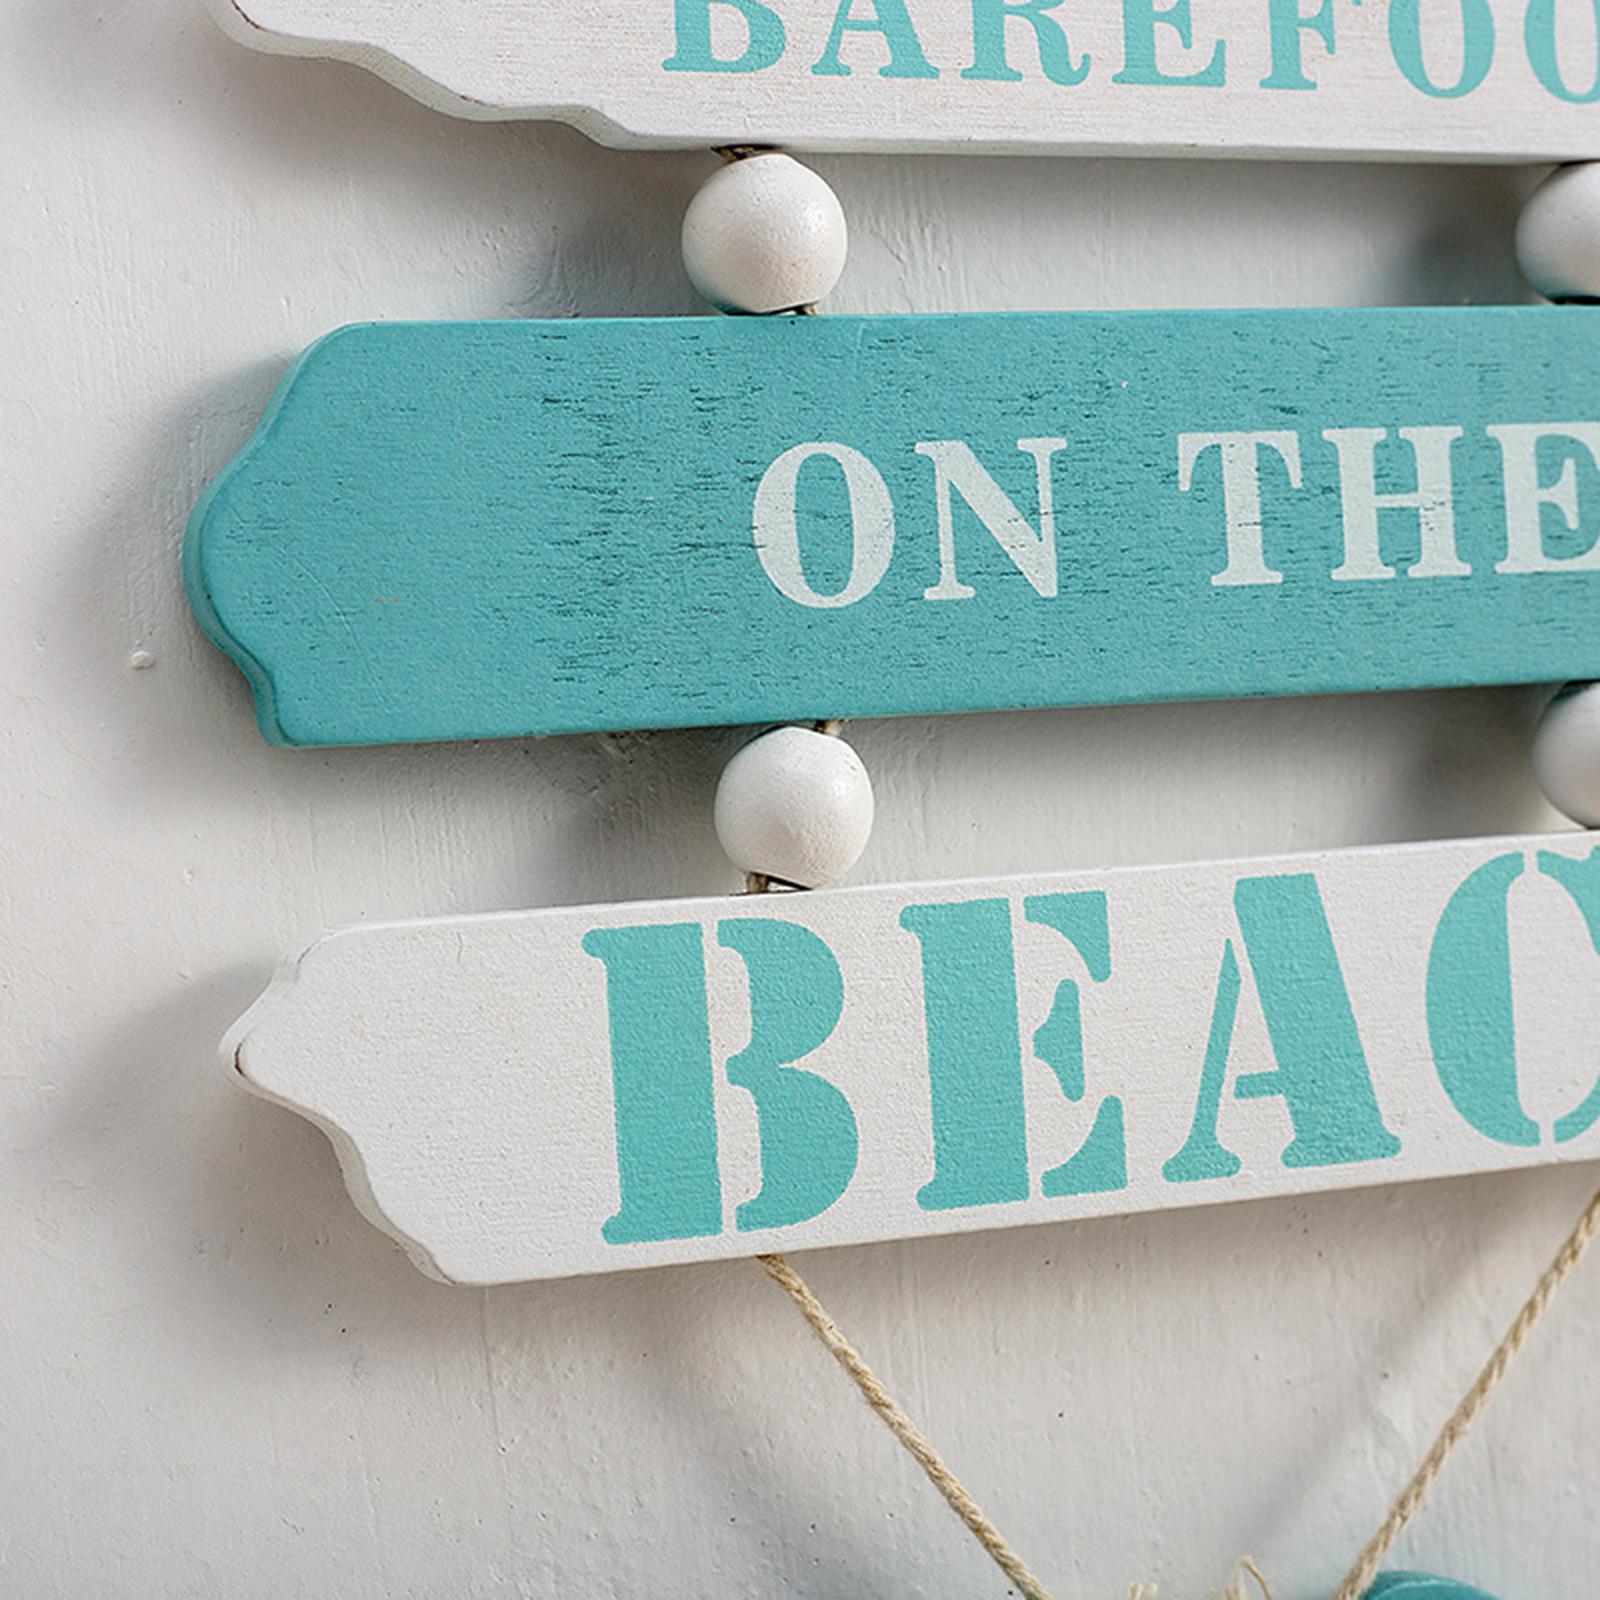 Wooden Hanging Beach Plaque Door Wall Plaque Decor Sign with Hanging Rope Wood Wall Decorative Sign Ornament Decoration